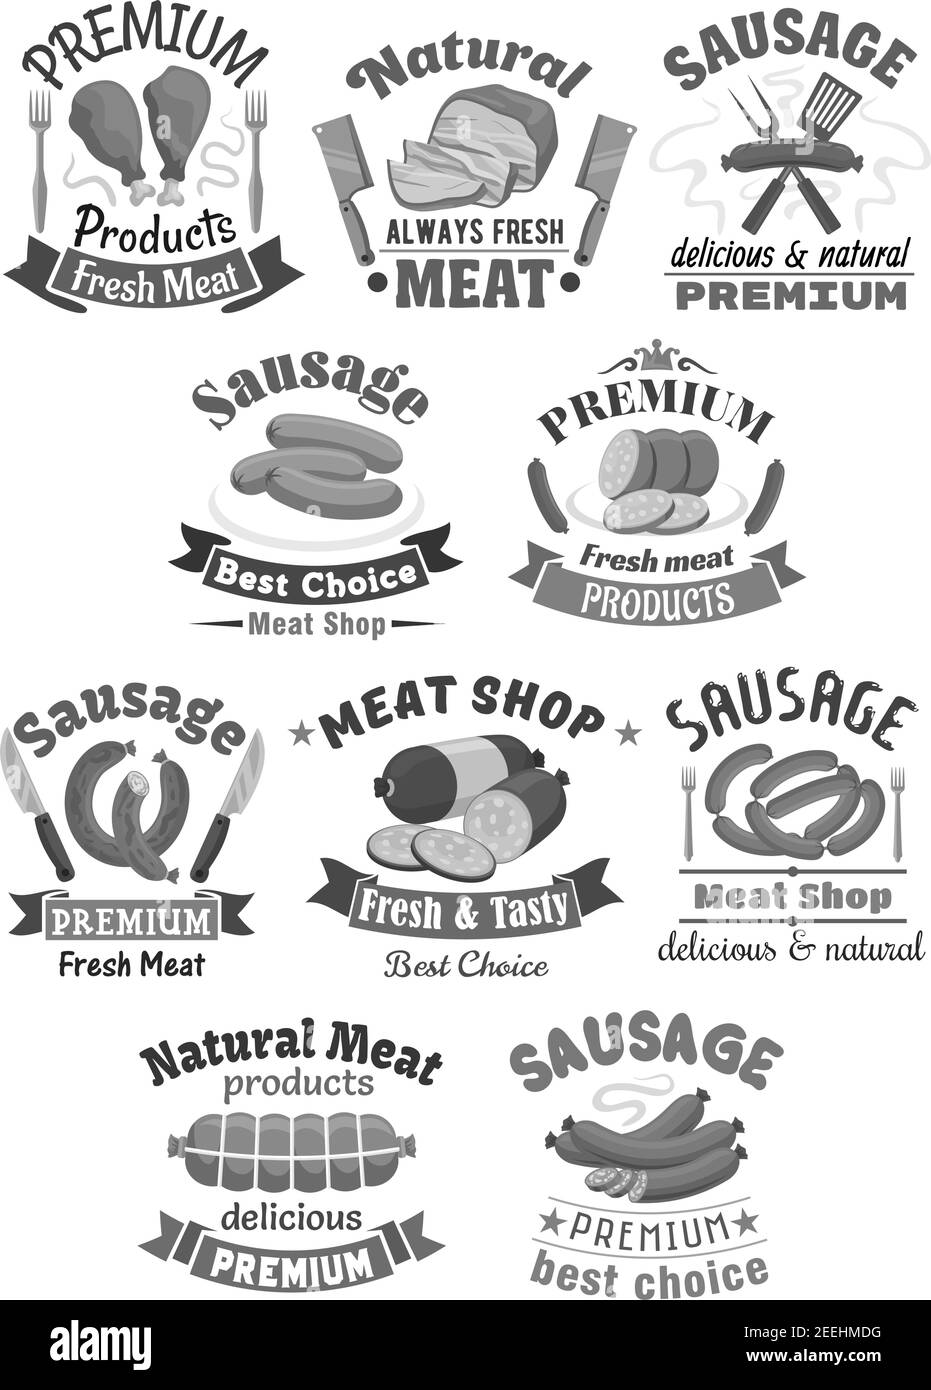 Meat products and sausages icons of premium butchery or meat market shop. Vector isolated brisket ham or bacon, brats, wiener and frankfurter sausages Stock Vector